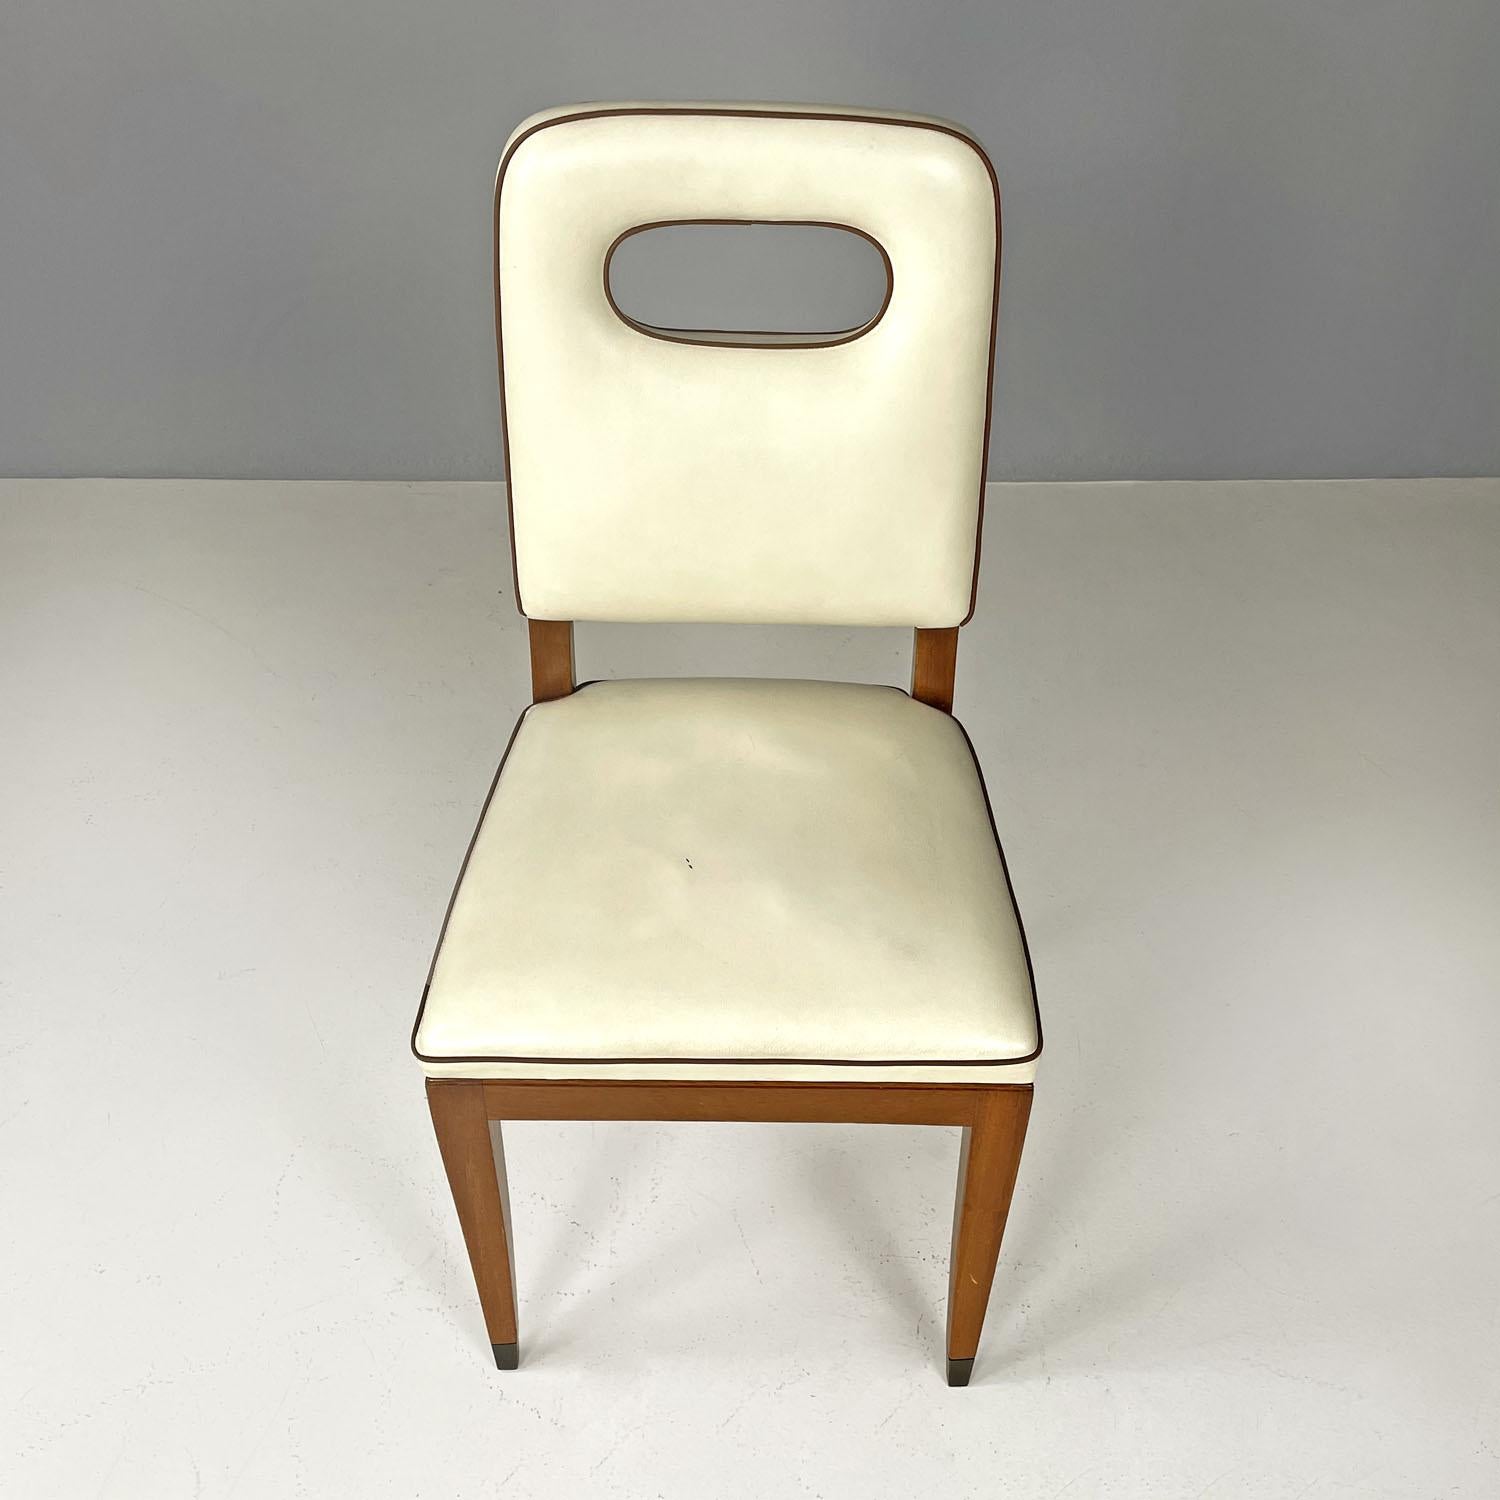 Italian Art Deco white leather and wood chair by Giovanni Gariboldi, 1940s For Sale 1